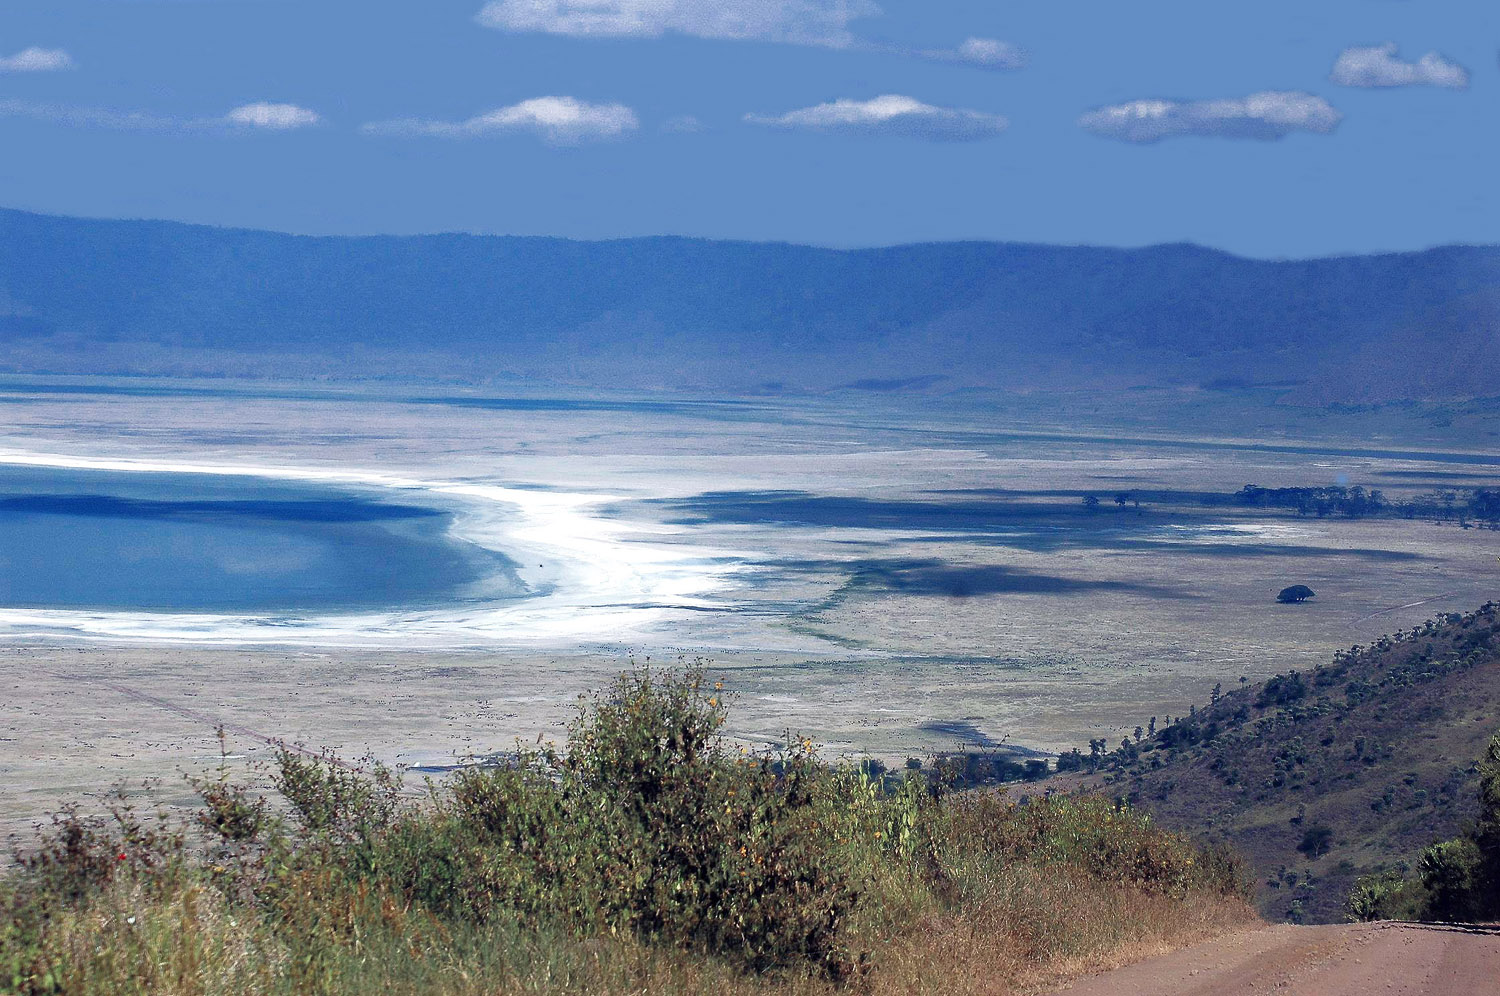 Eclipse 2004 - Ngoro - A16 - Crater View